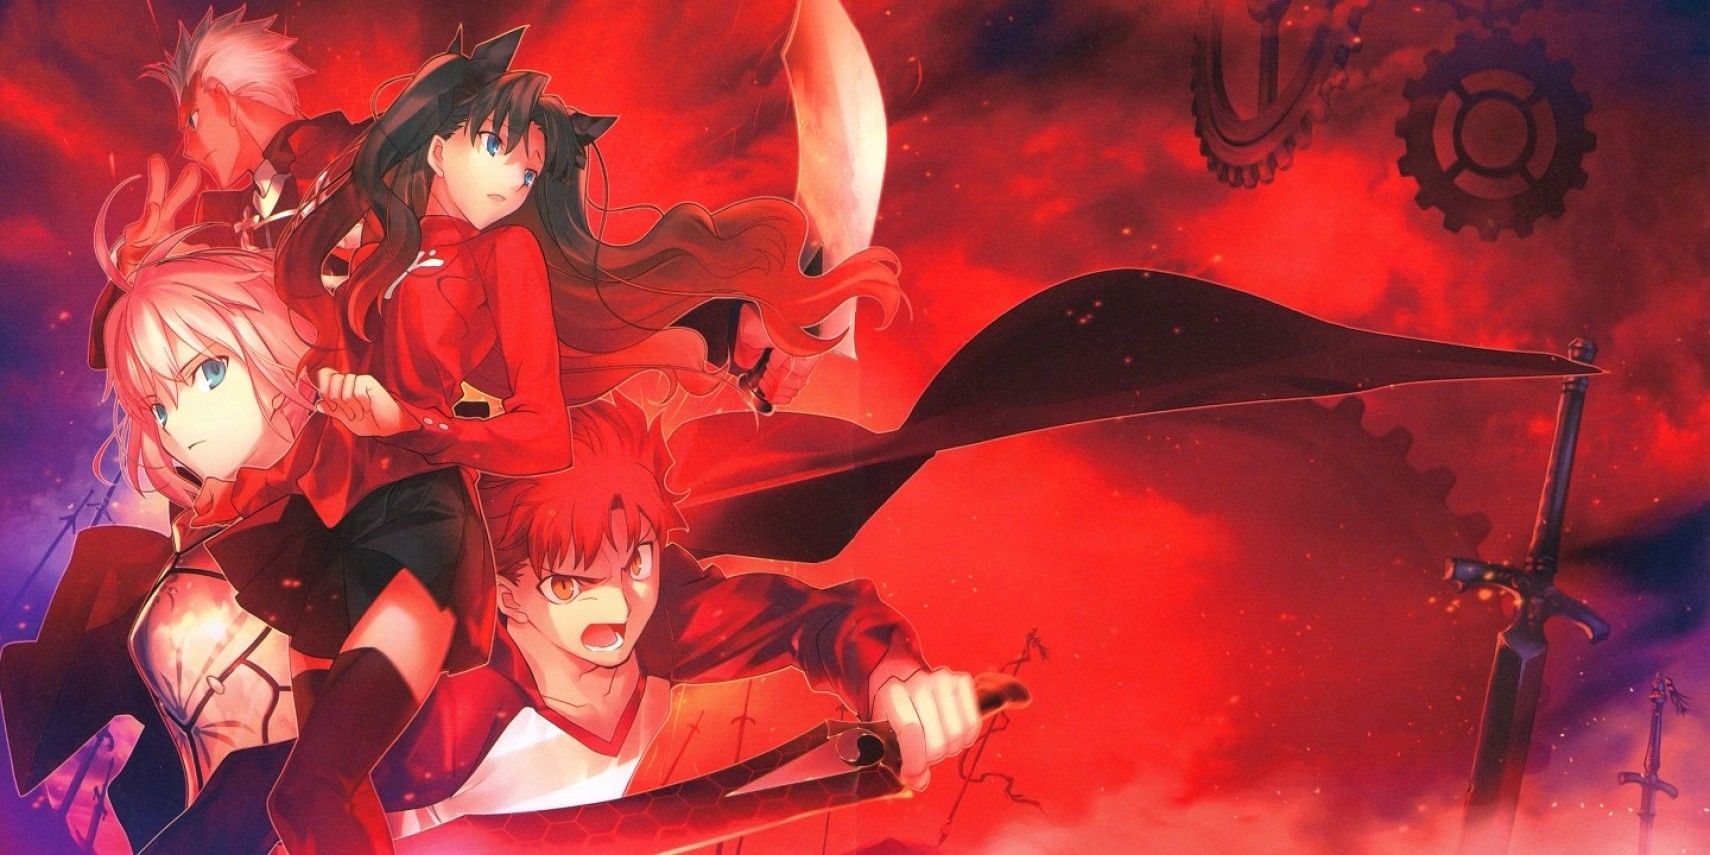 An image of the cast of Fate/Stay Night: Unlimited Blade Works.